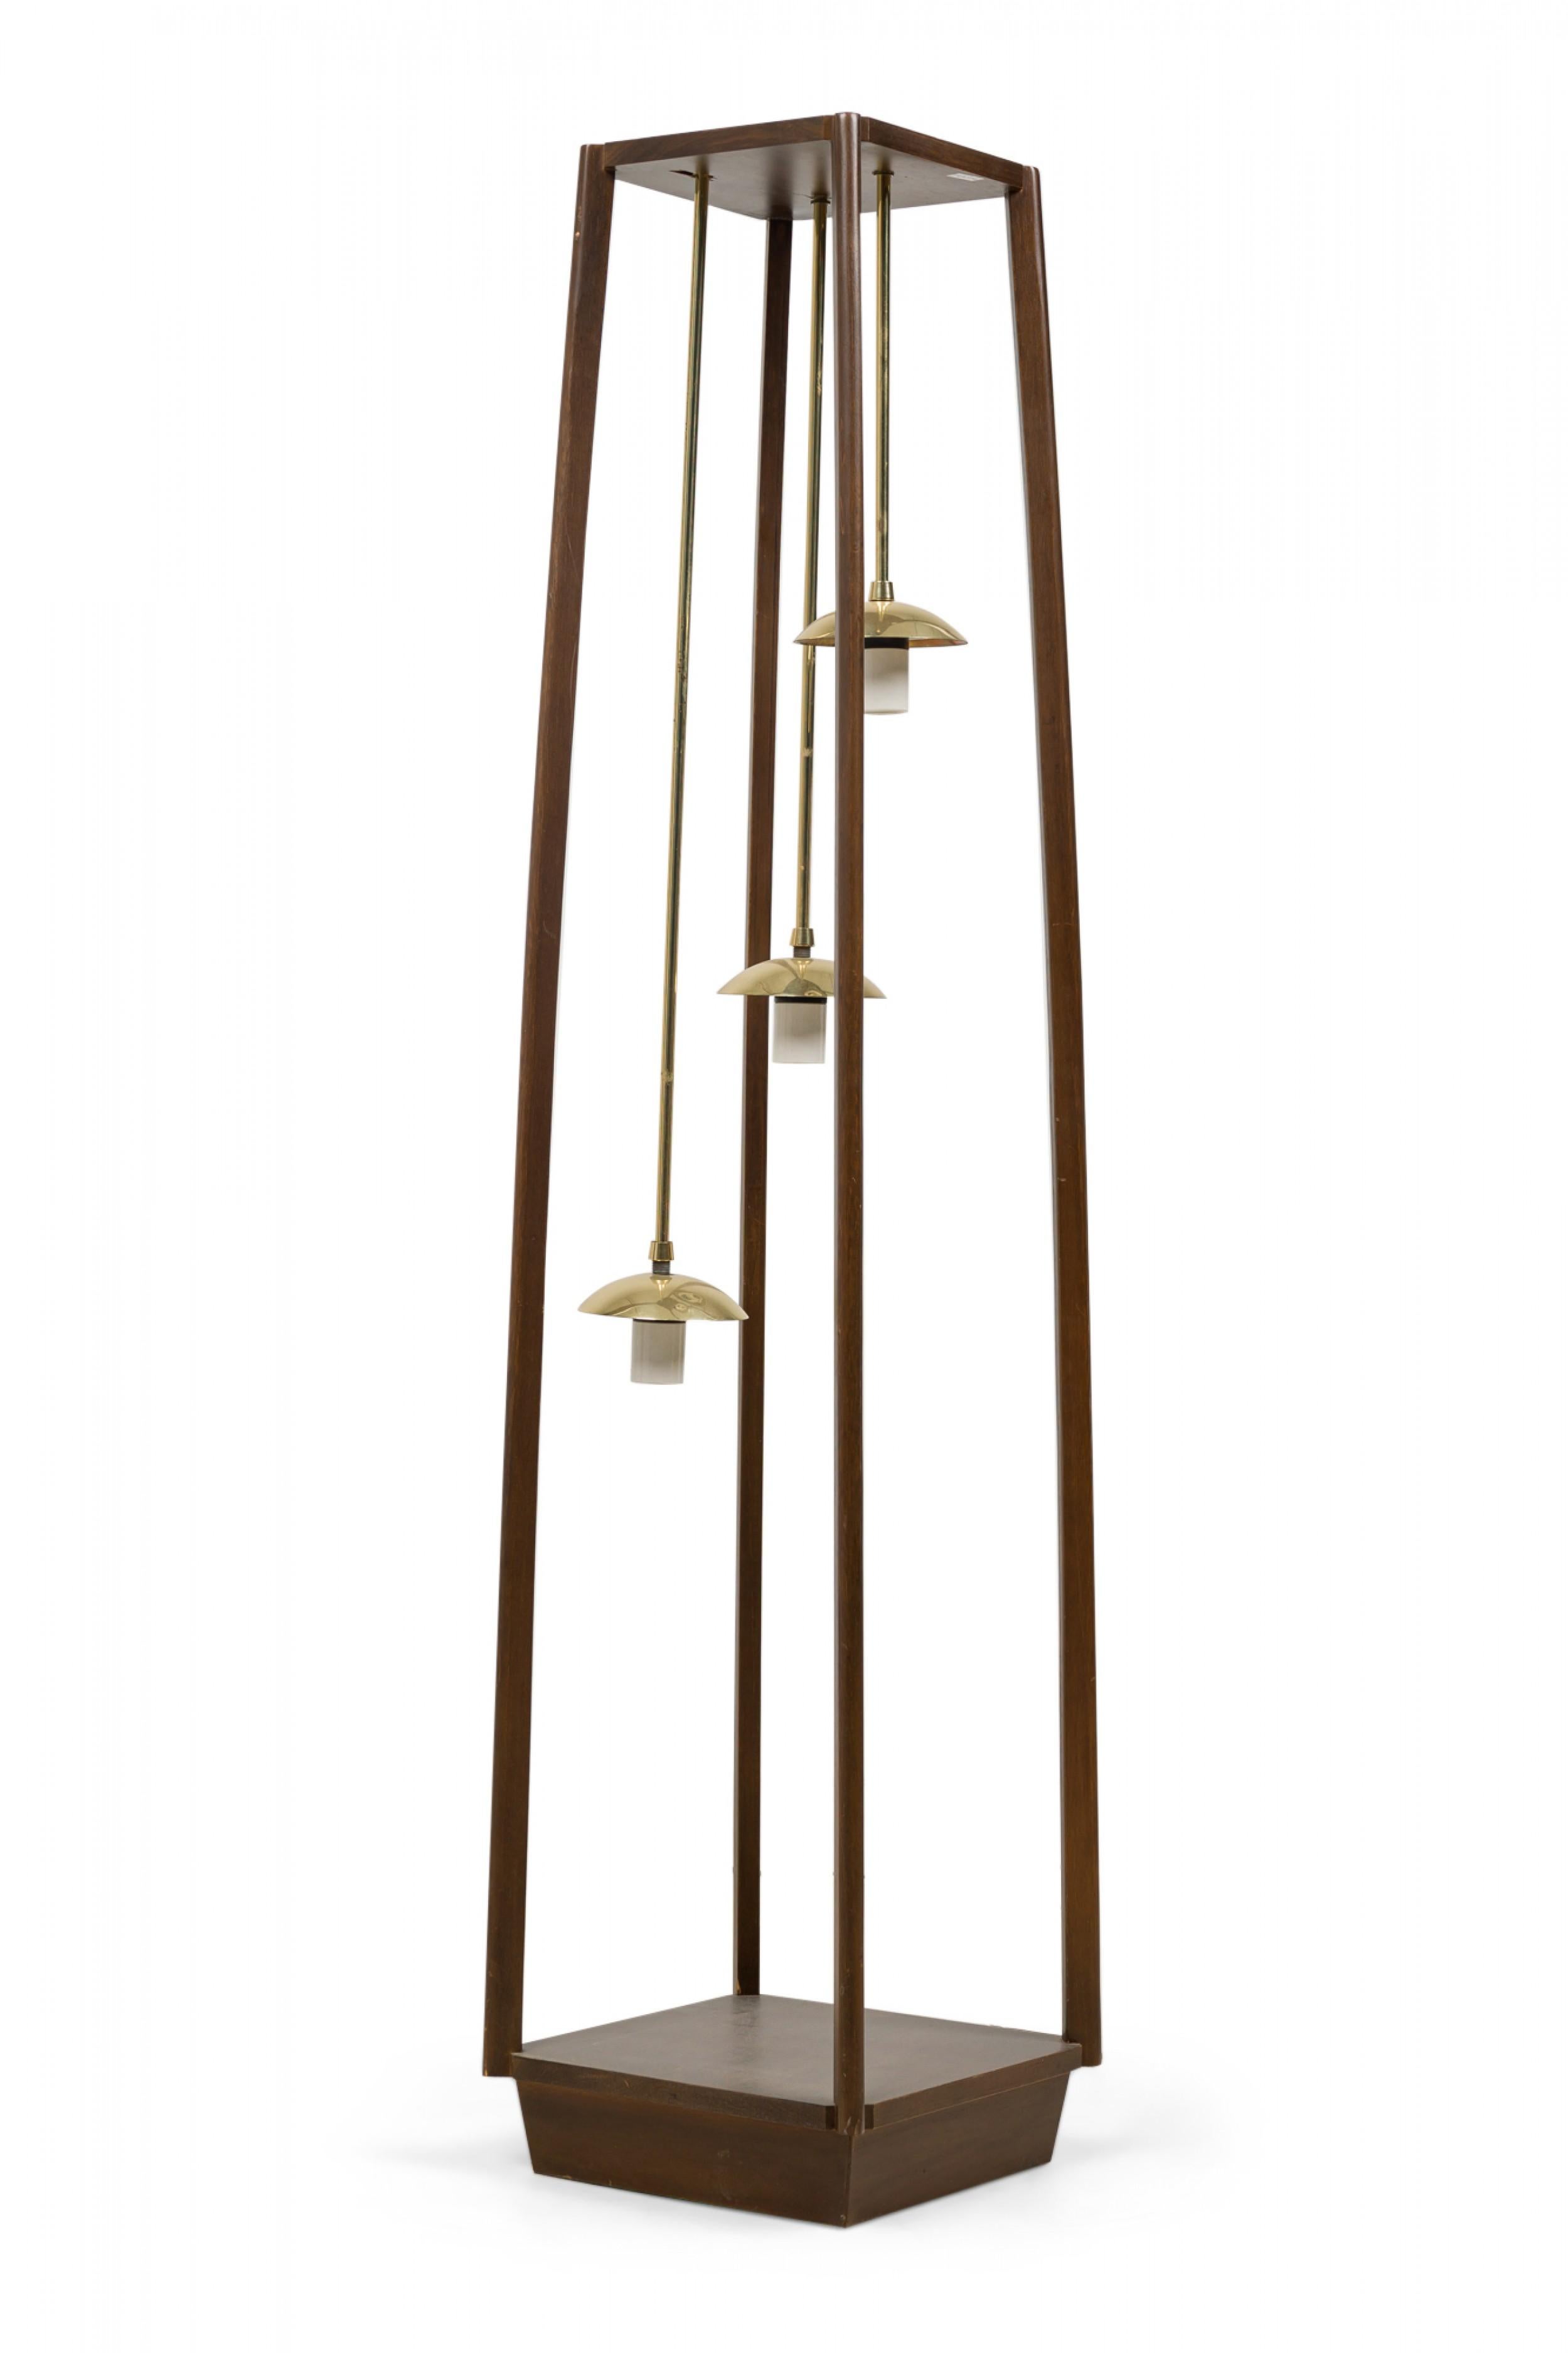 Italian Mid-Century Modern floor lamp featuring a wooden frame that tapers slightly to the top, suspending three brass pendant lights at stepped heights, each having a polished brass dome shade over a cylindrical frosted glass light.